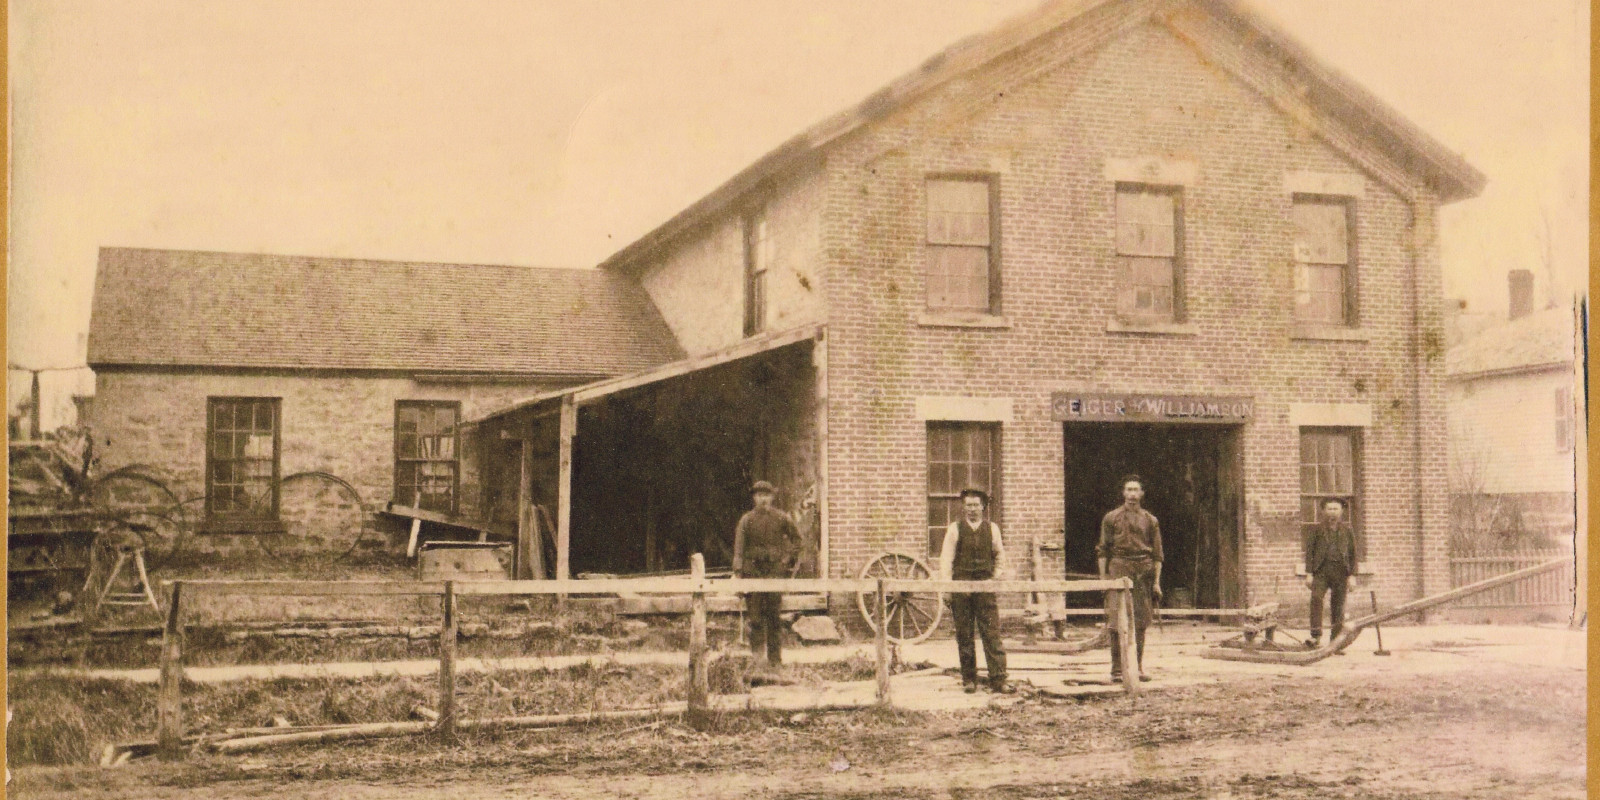 1890 photo of the Geiger and Williamson blacksmith shop, Madison, WI